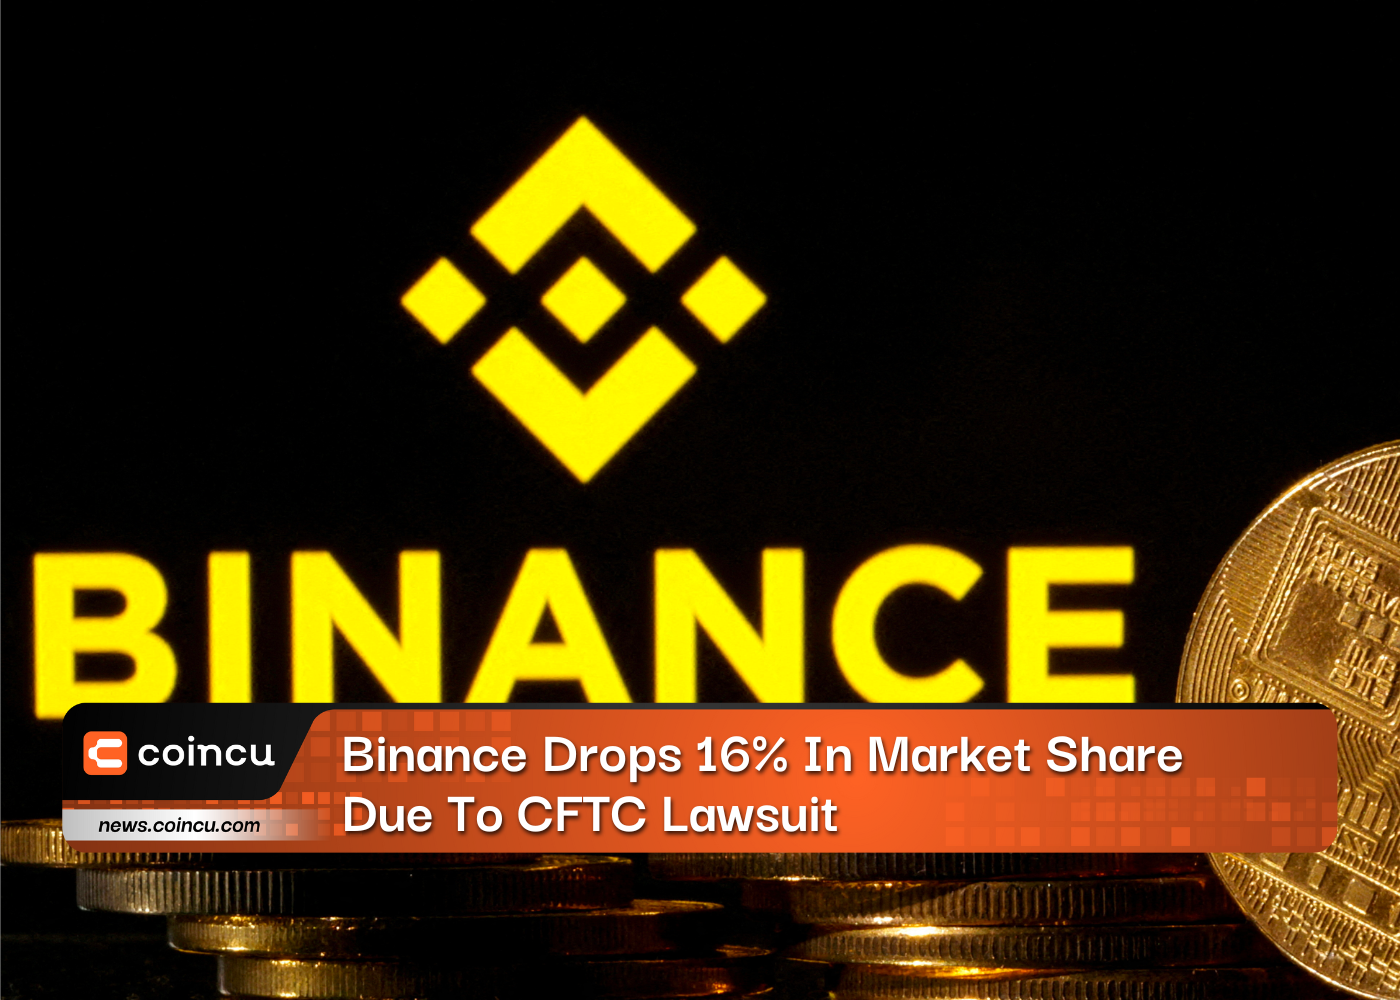 Binance Drops 16% In Market Share Due To CFTC Lawsuit